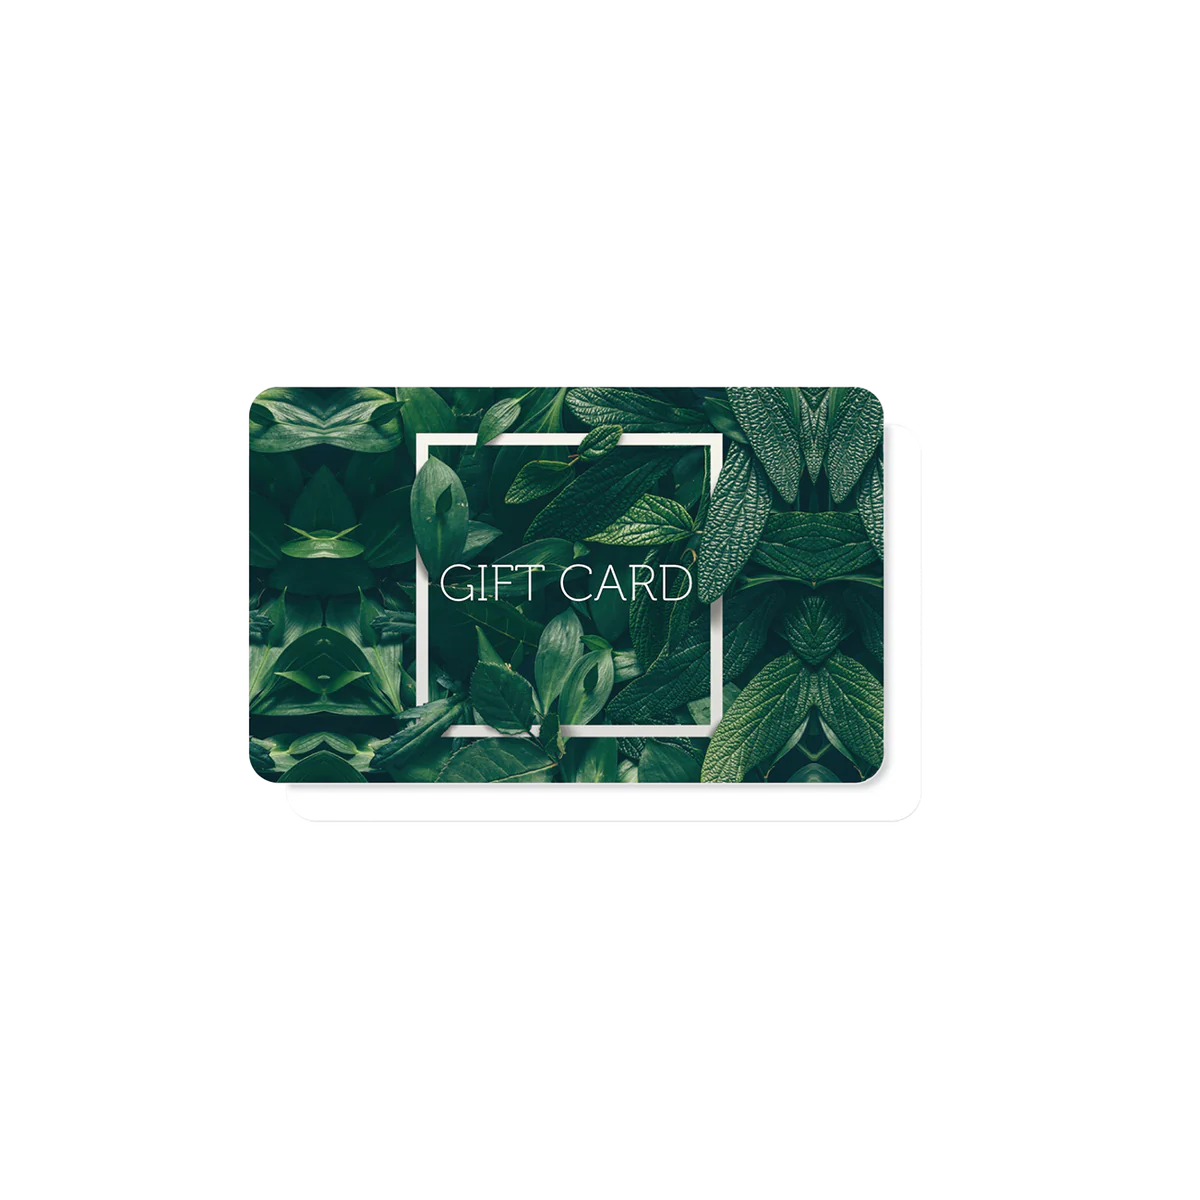 The Mix Giftcard